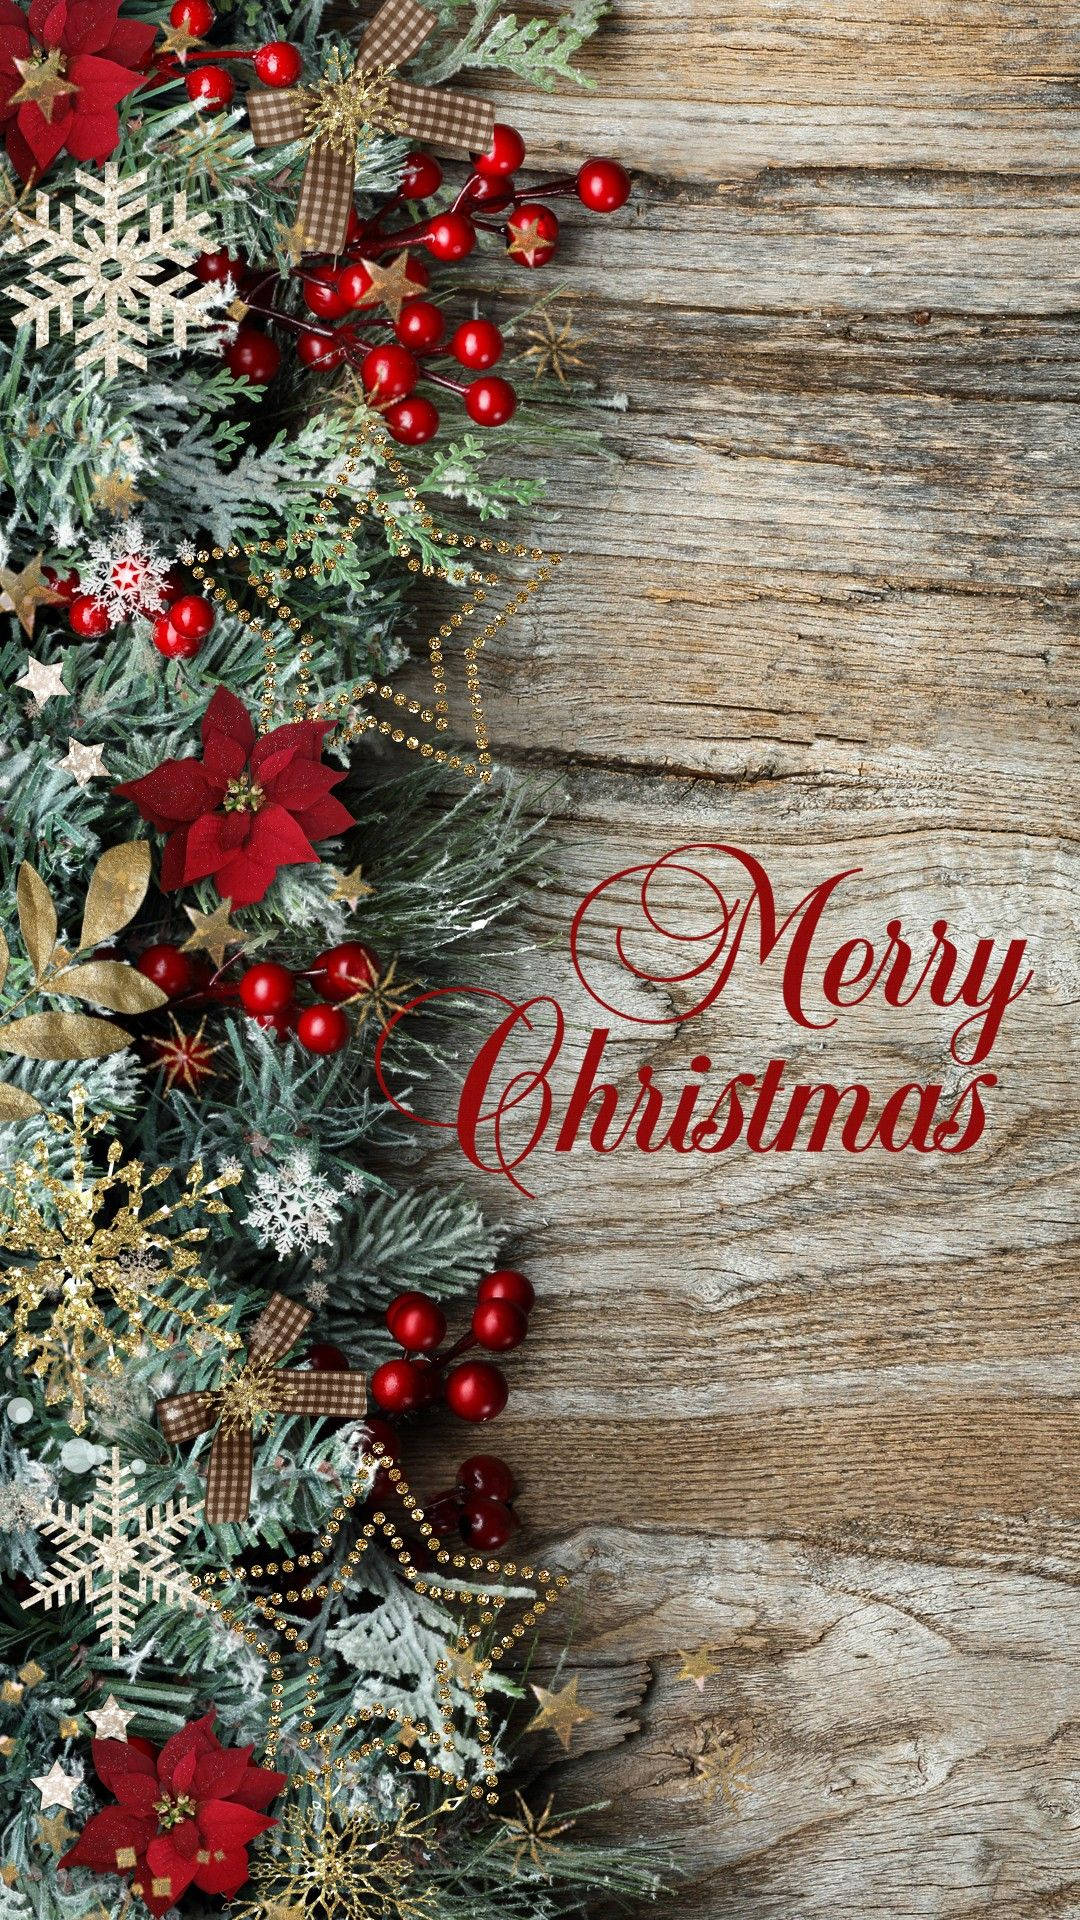 Merry Christmas Greeting Phone Background